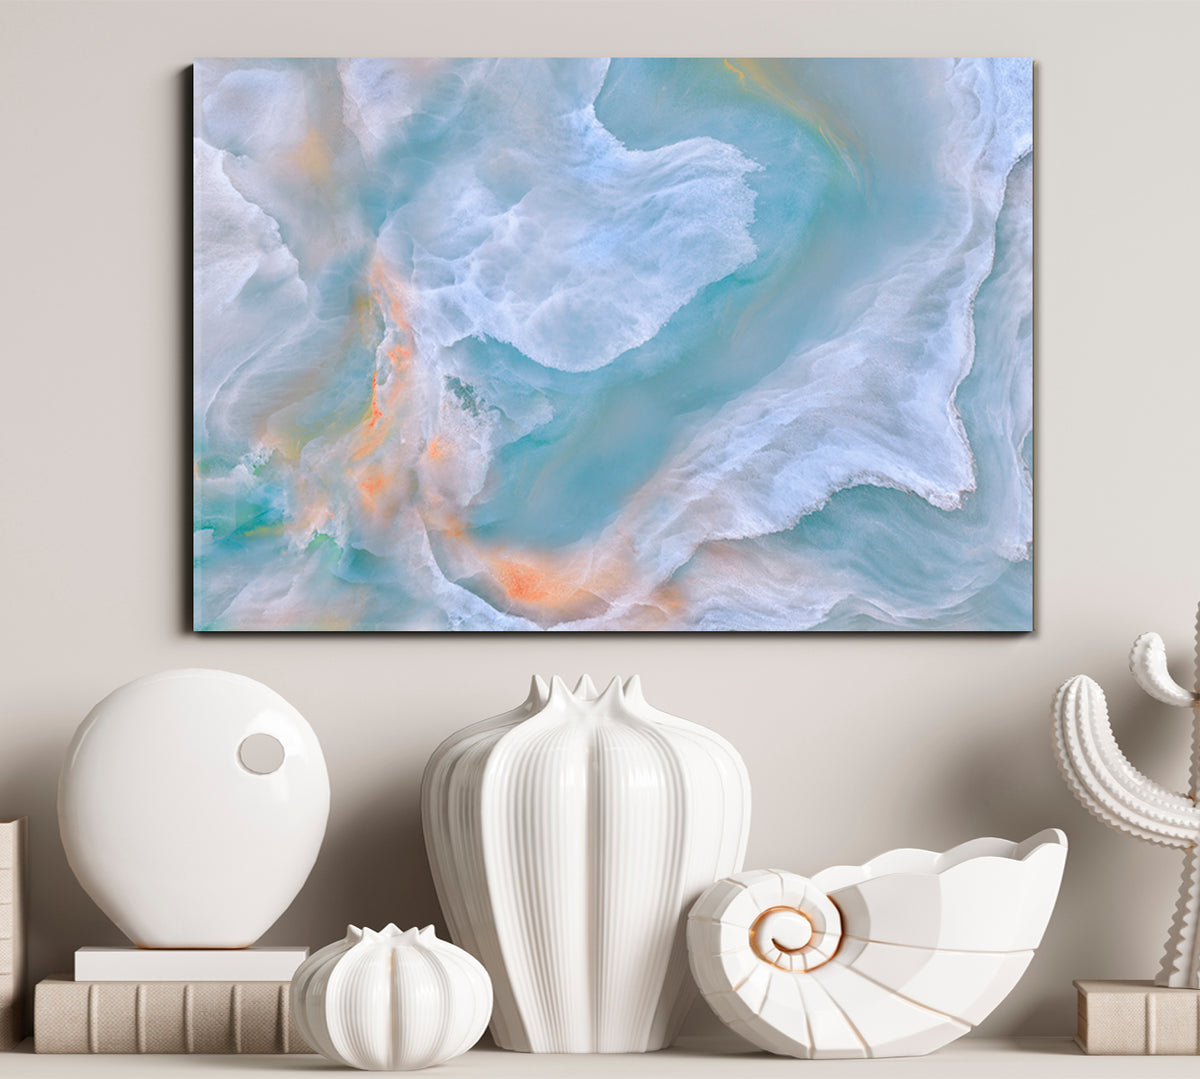 Cloudy Abstract Onyx Marble Veins Free-flowing Natural Luxury Artwork Fluid Art, Oriental Marbling Canvas Print Artesty 1 panel 24" x 16" 